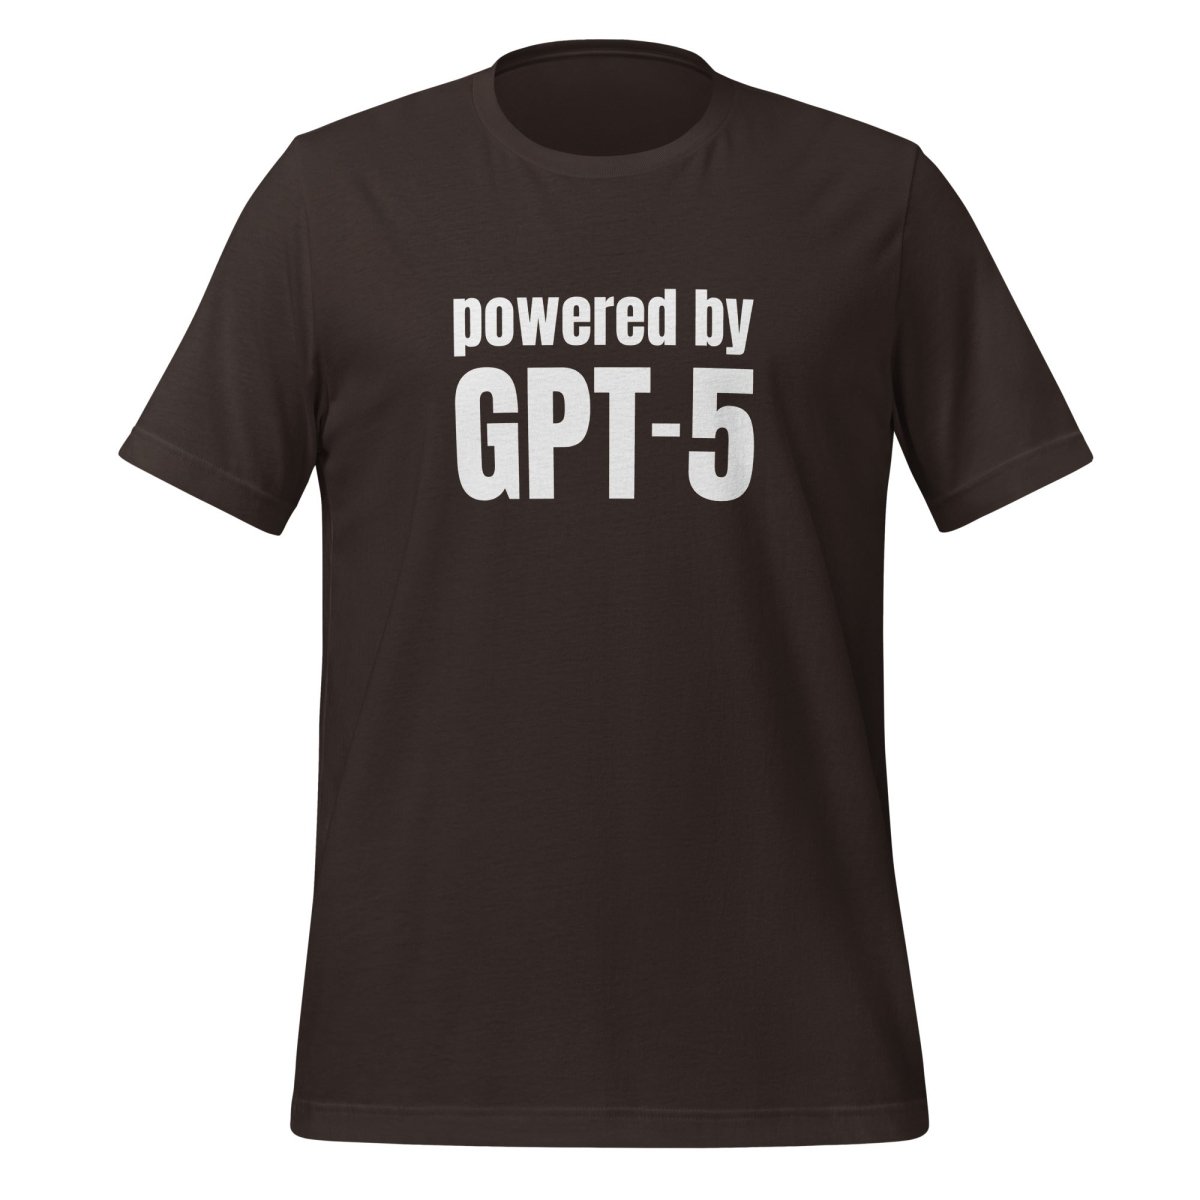 Powered by GPT - 5 T - Shirt (unisex) - Brown - AI Store